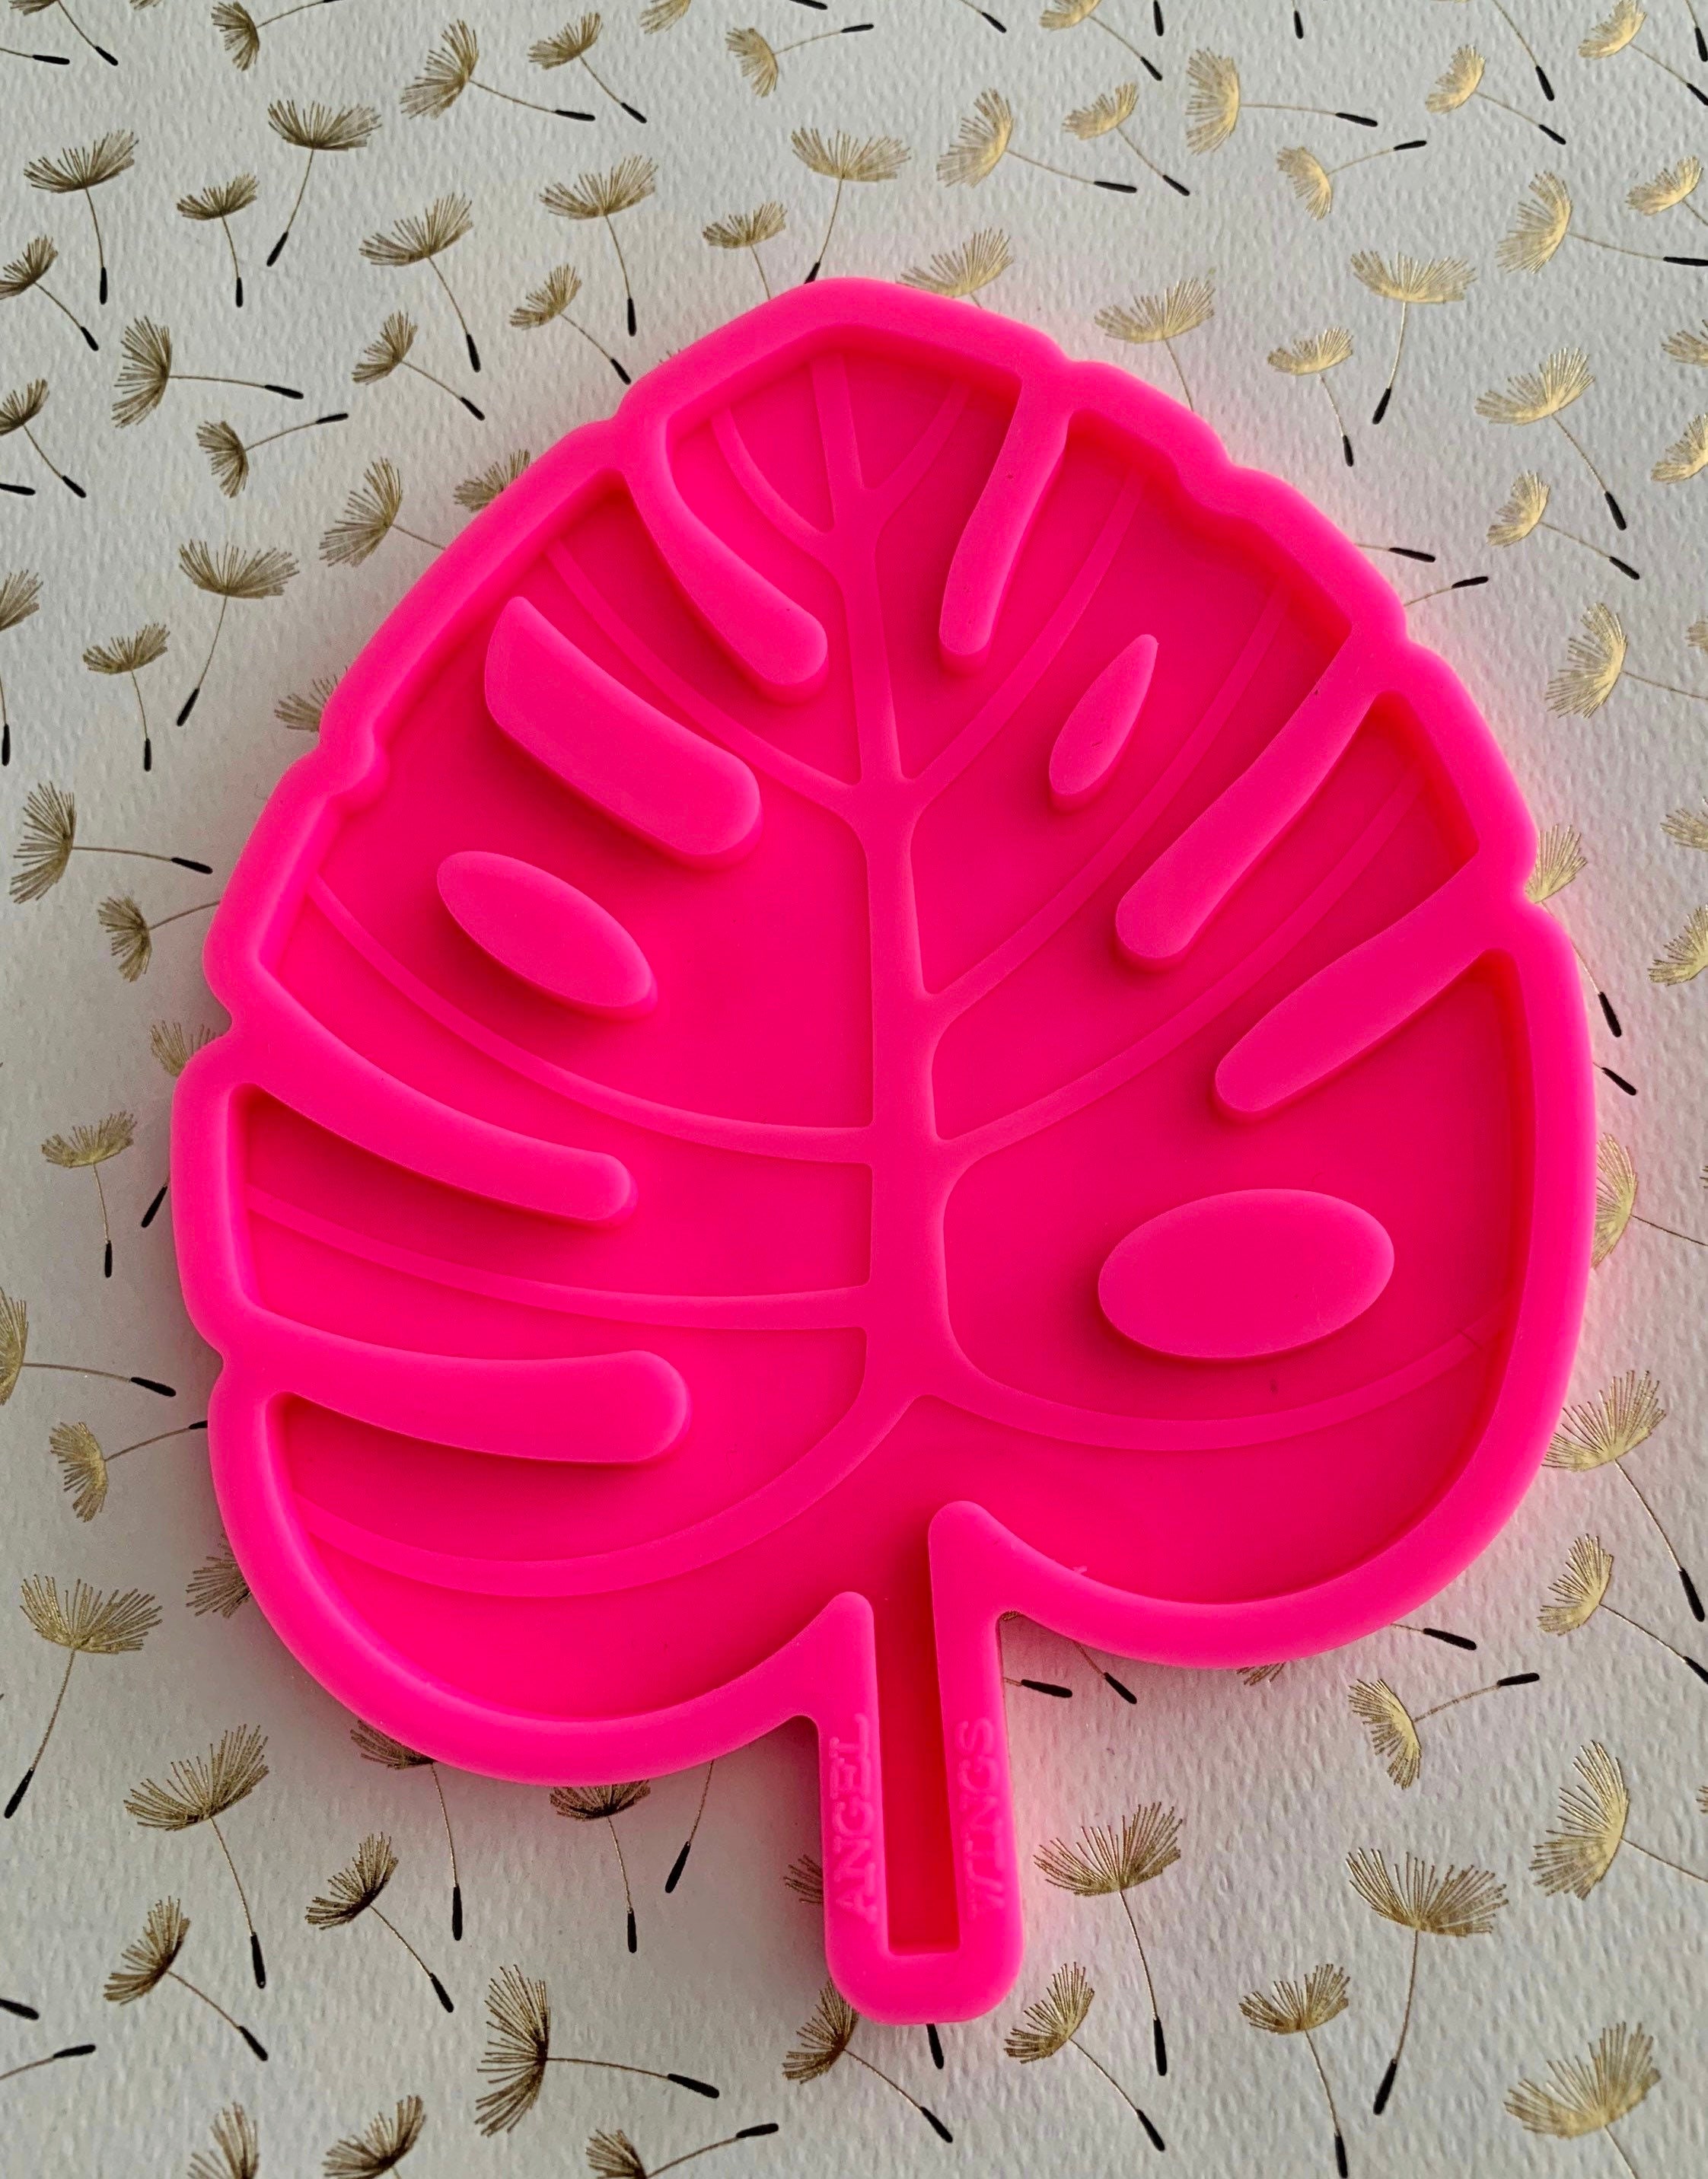 Cute Angel Rubber Silicone Molds For Soap Making Pink Color 7.6